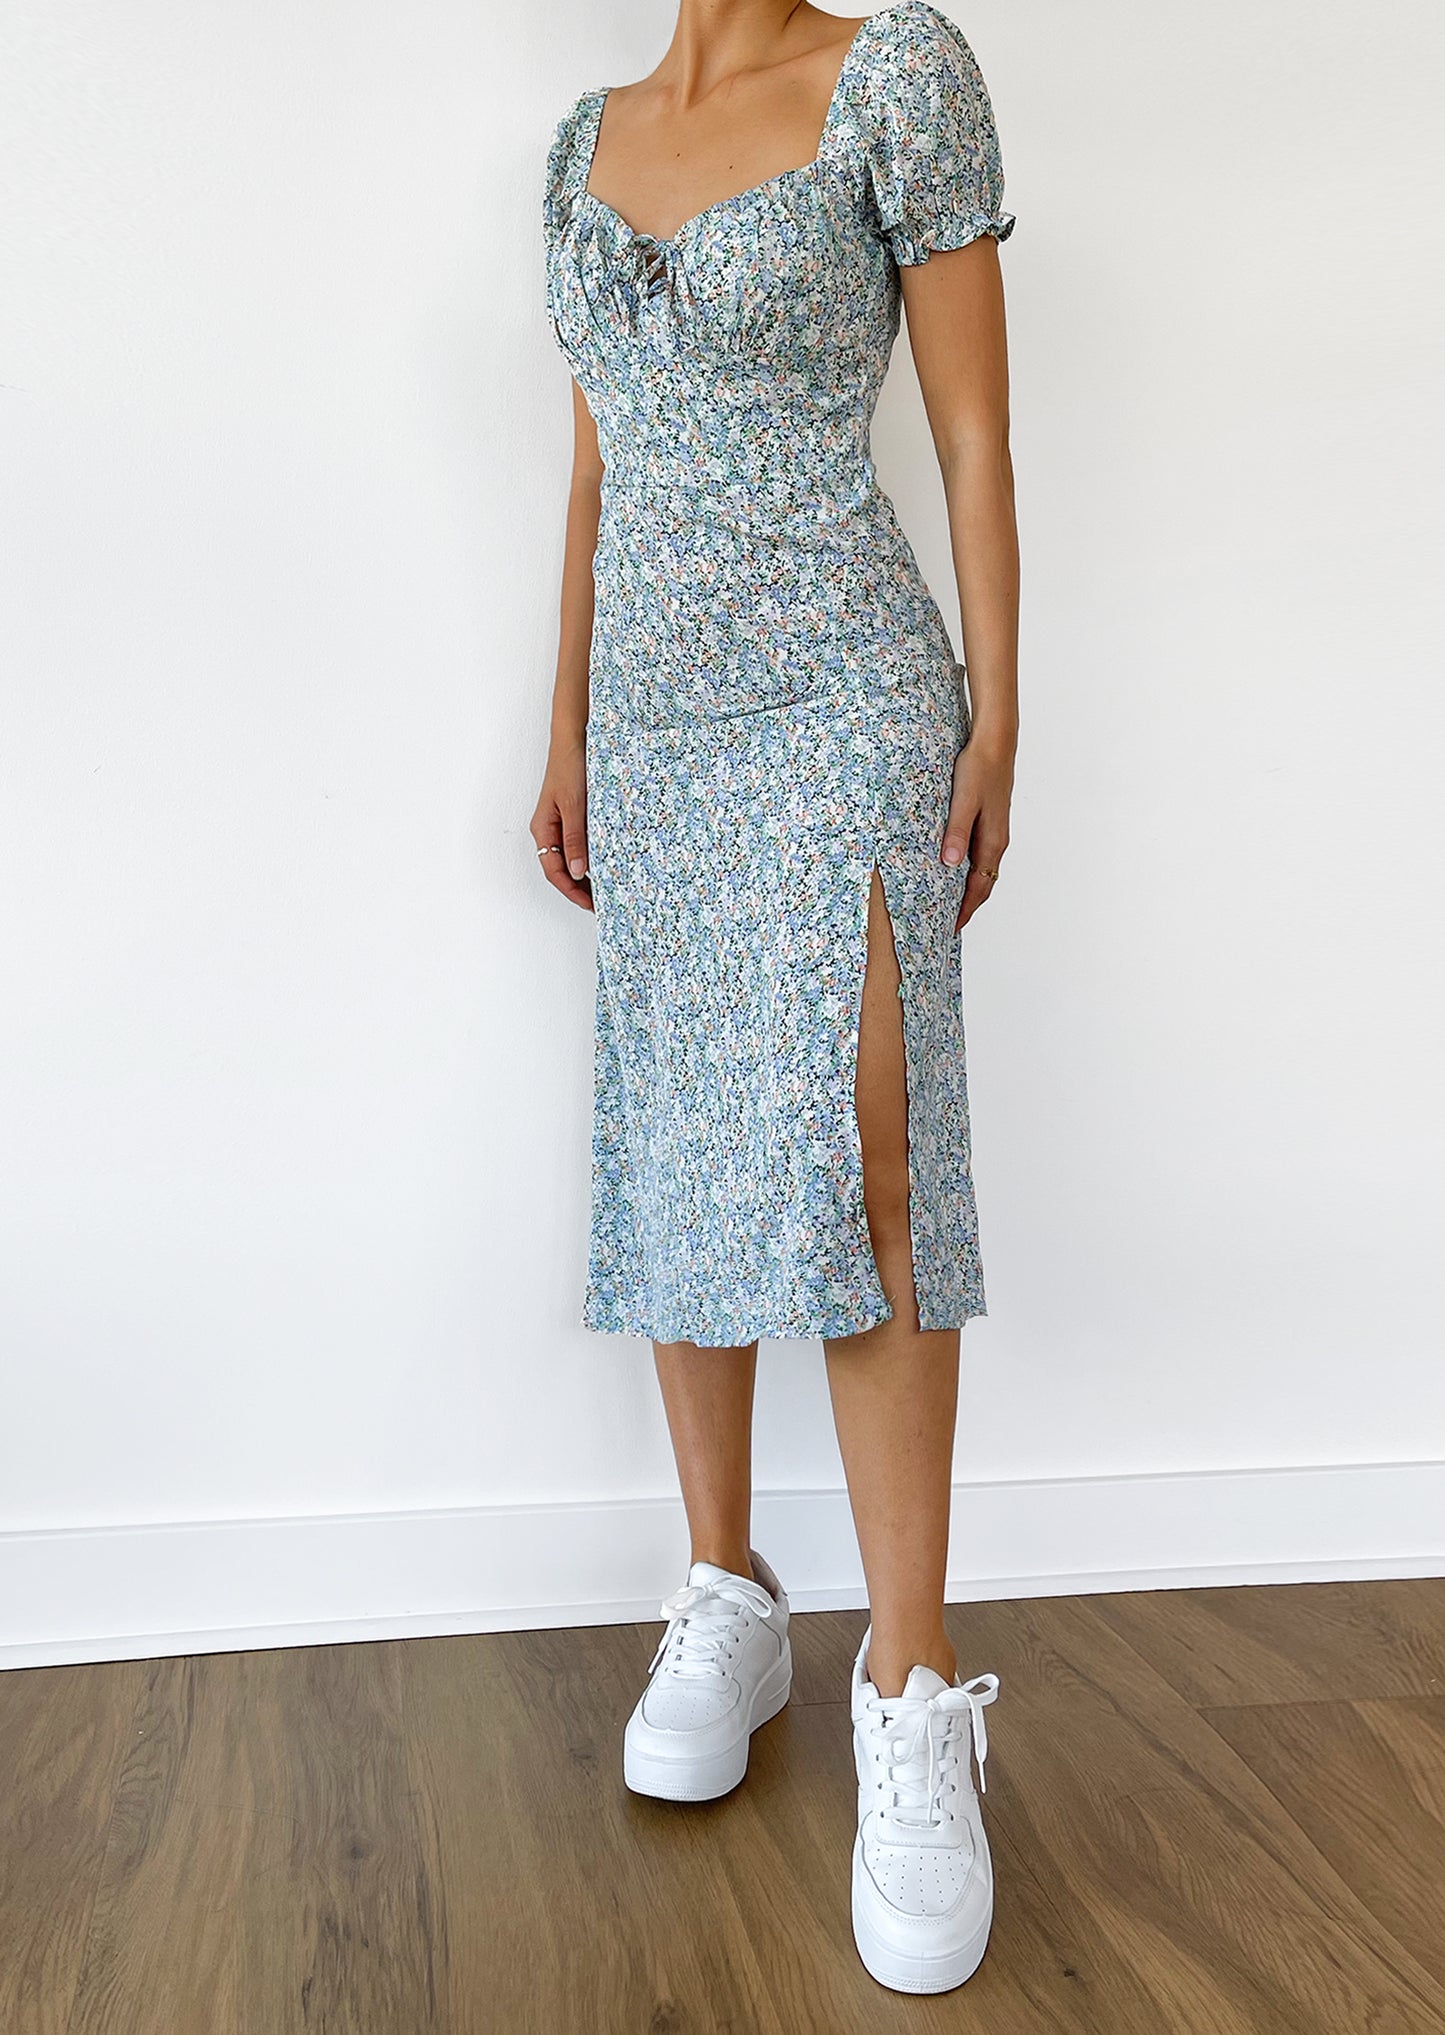 Floral midi dress with thigh split in floral blue